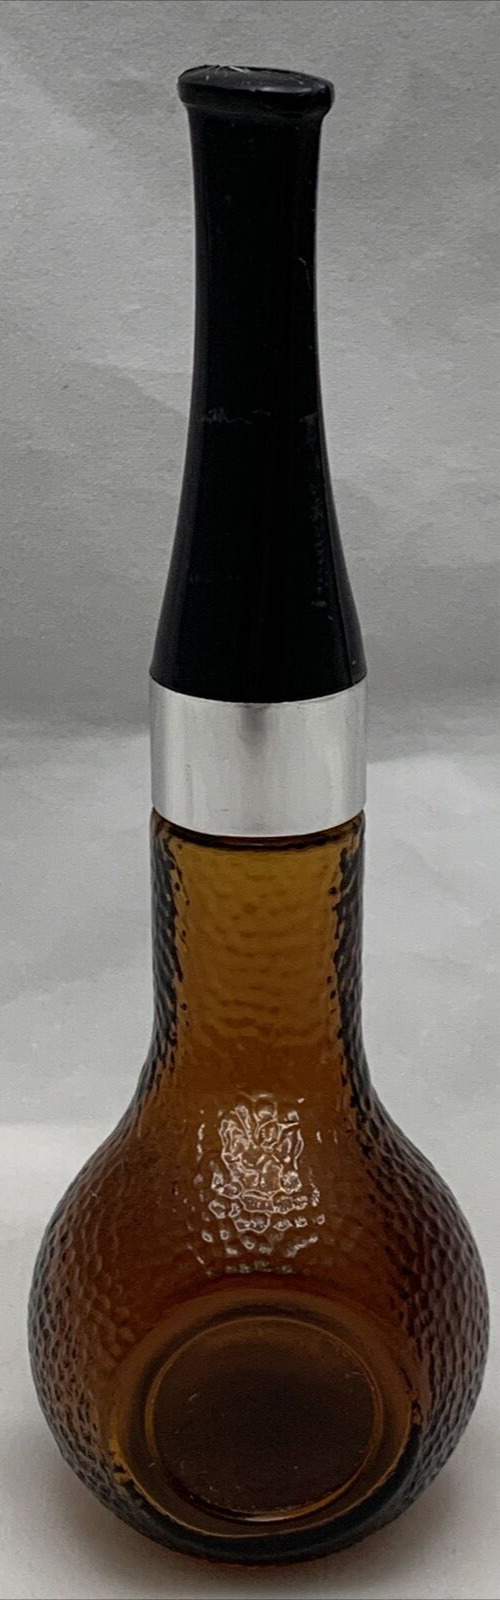 Avon Bottle Pipe Tobacco Smoking Art Glass Vintage Cologne Perfume After Shave